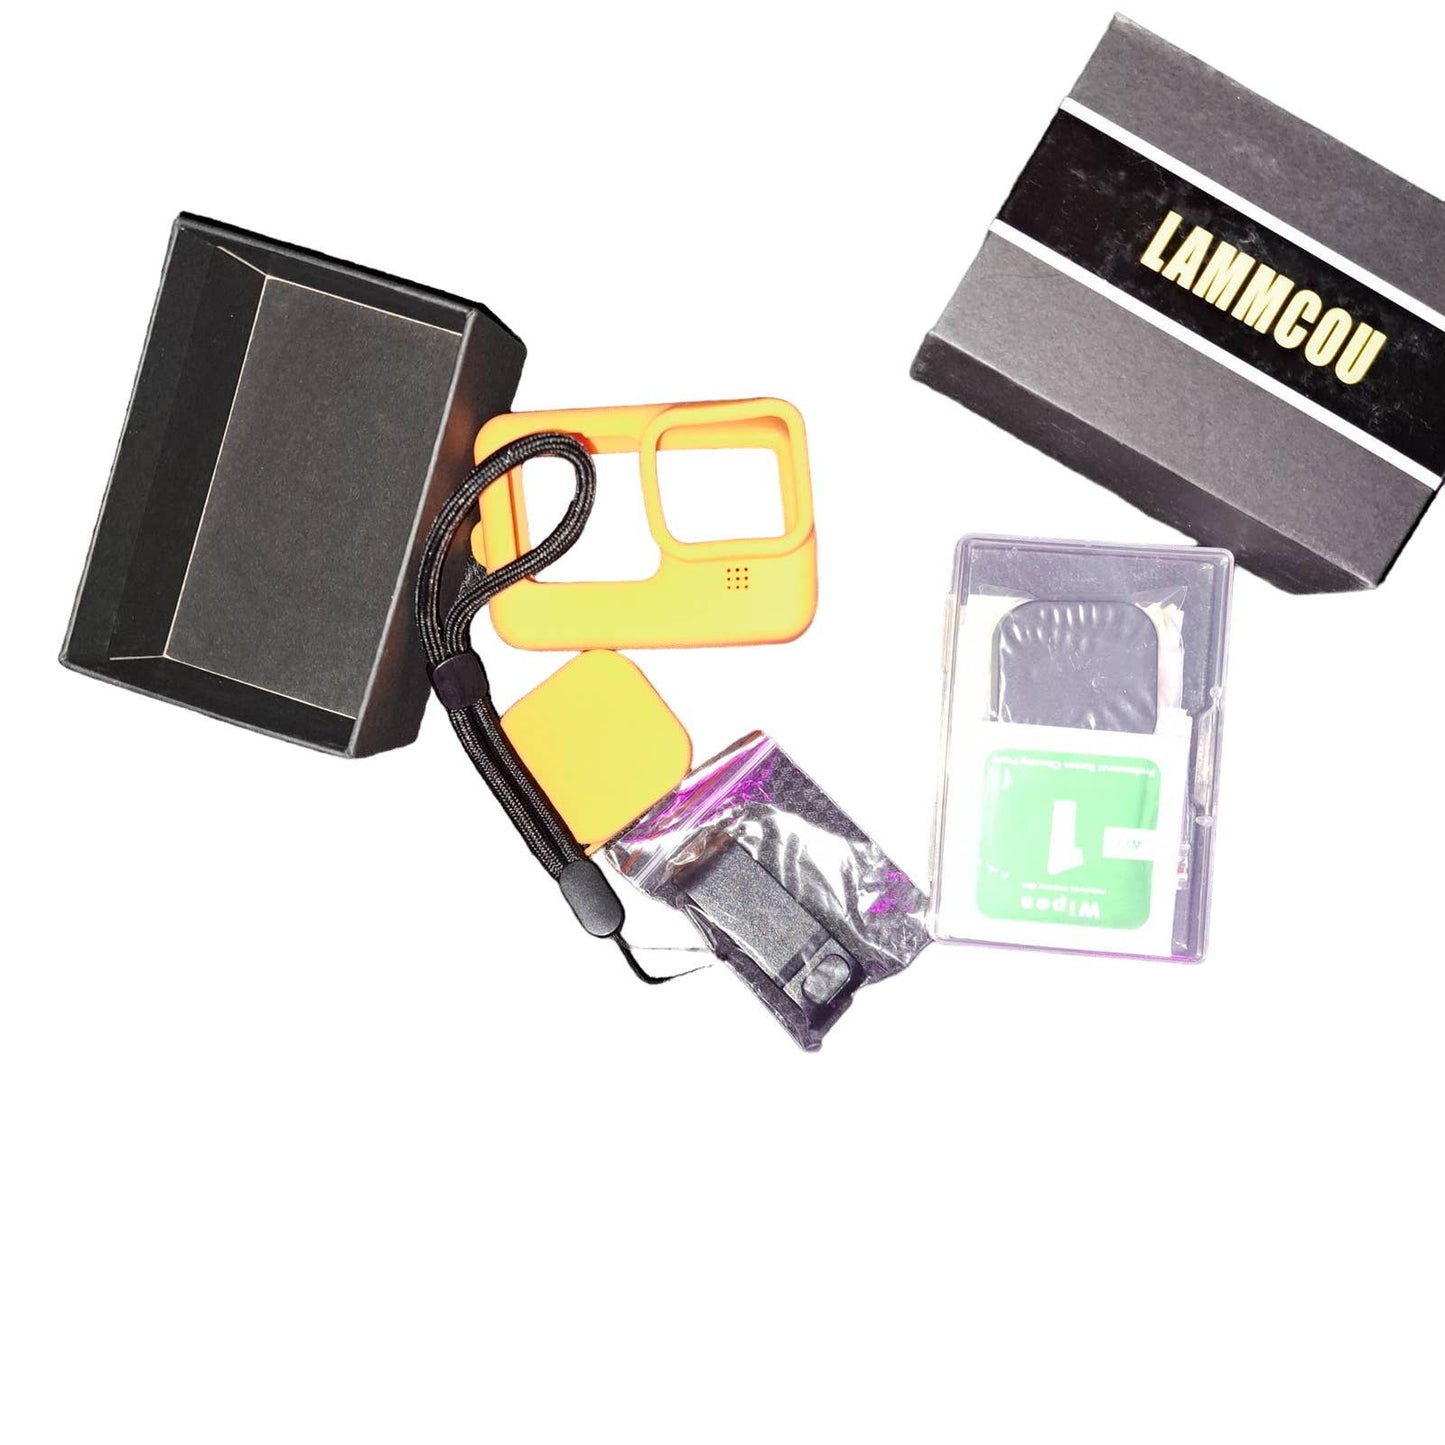 Lammcou Replacement Silicone Protective Case for Hero 11 10 9